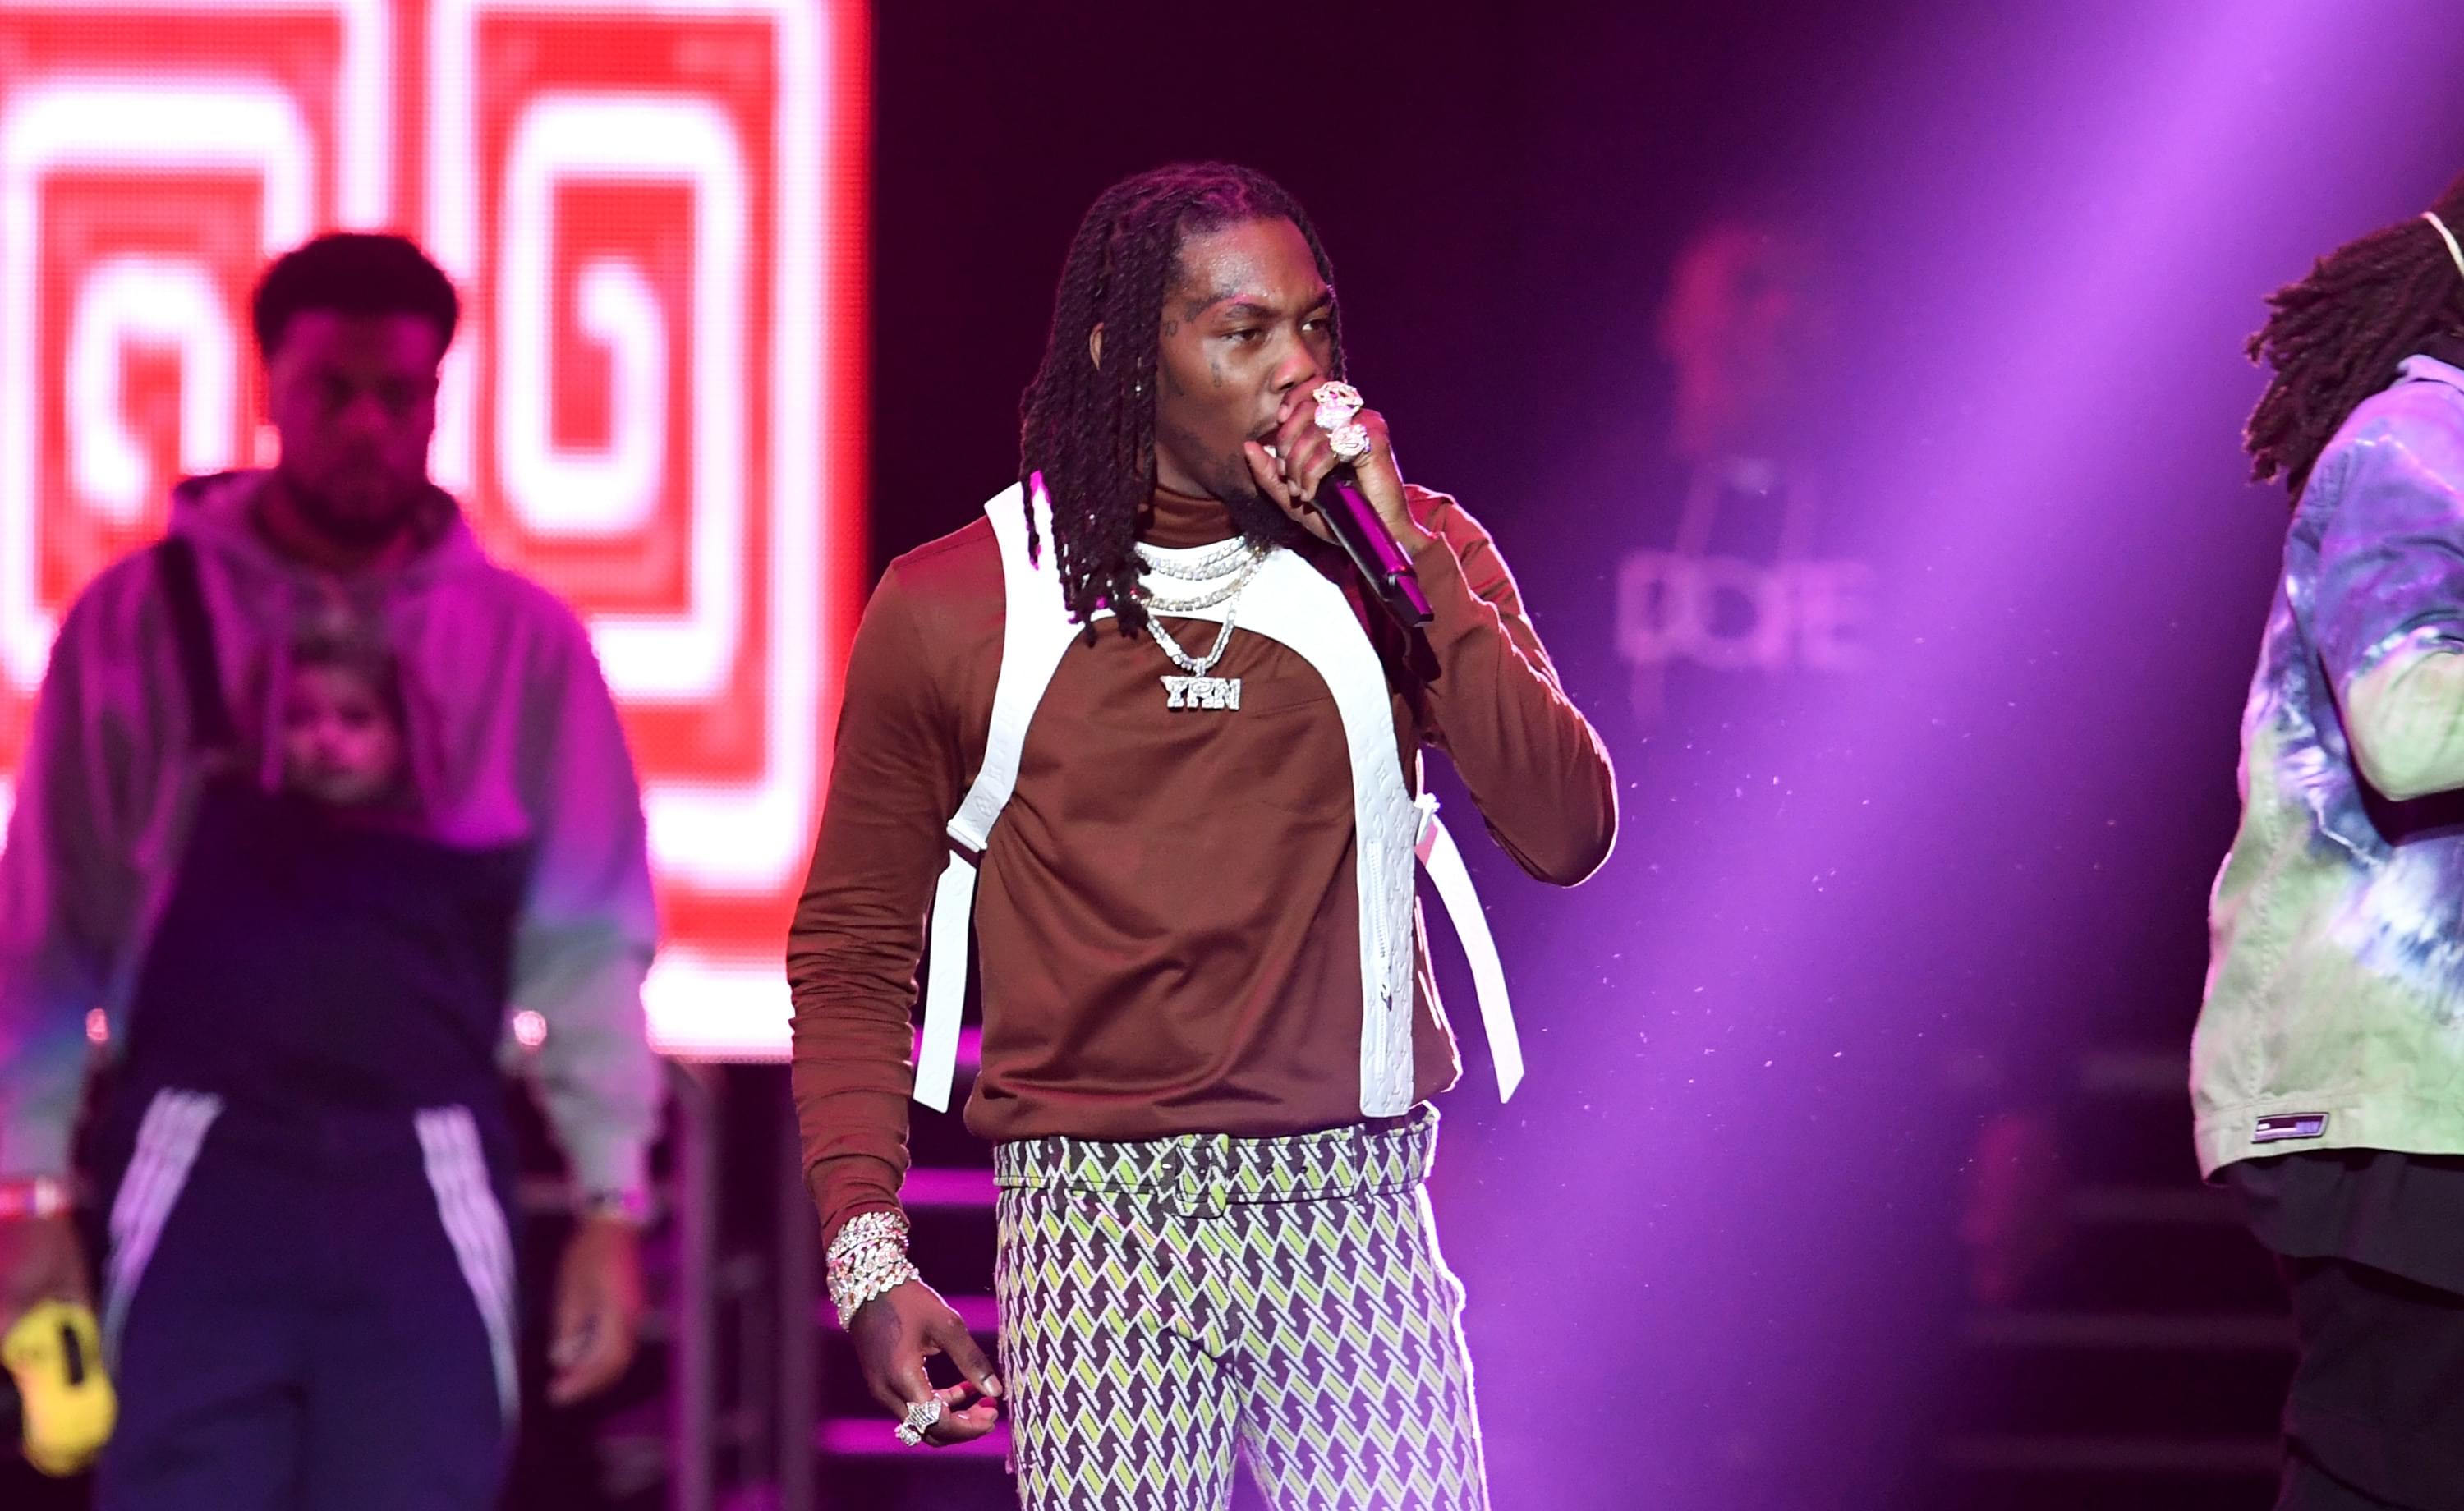 Offset Reunites With Father After Not Seeing Him For 23 Years